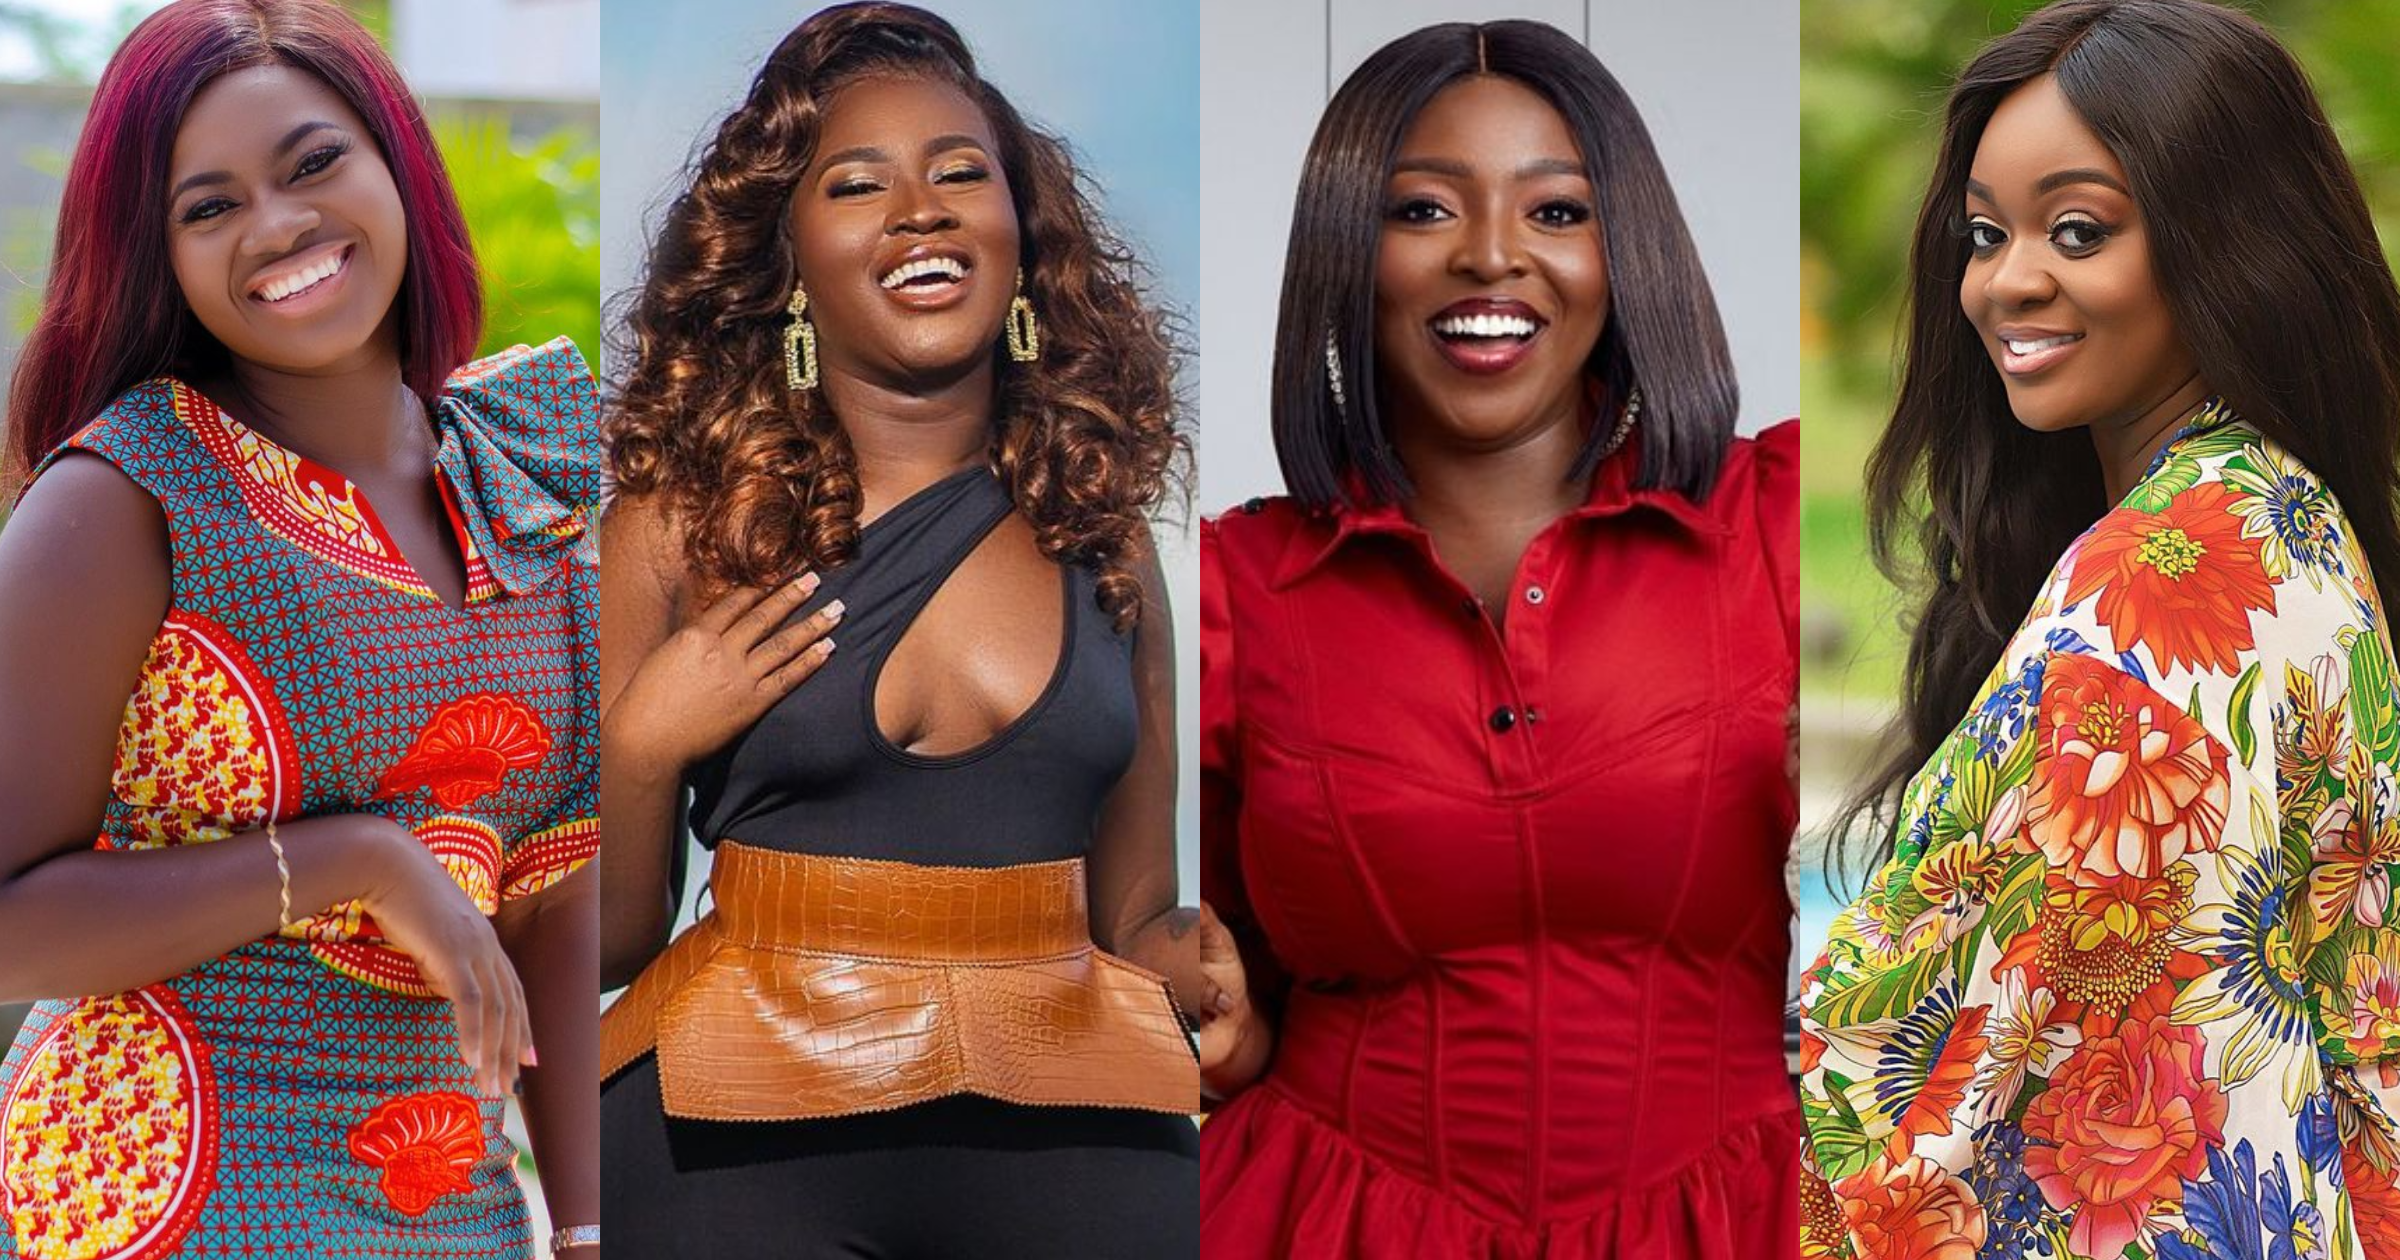 Dark and lovely: Jackie Appiah, Fella, Okoro 7 other beautiful Ghanaian celebs who have not 'bleached' their black skins